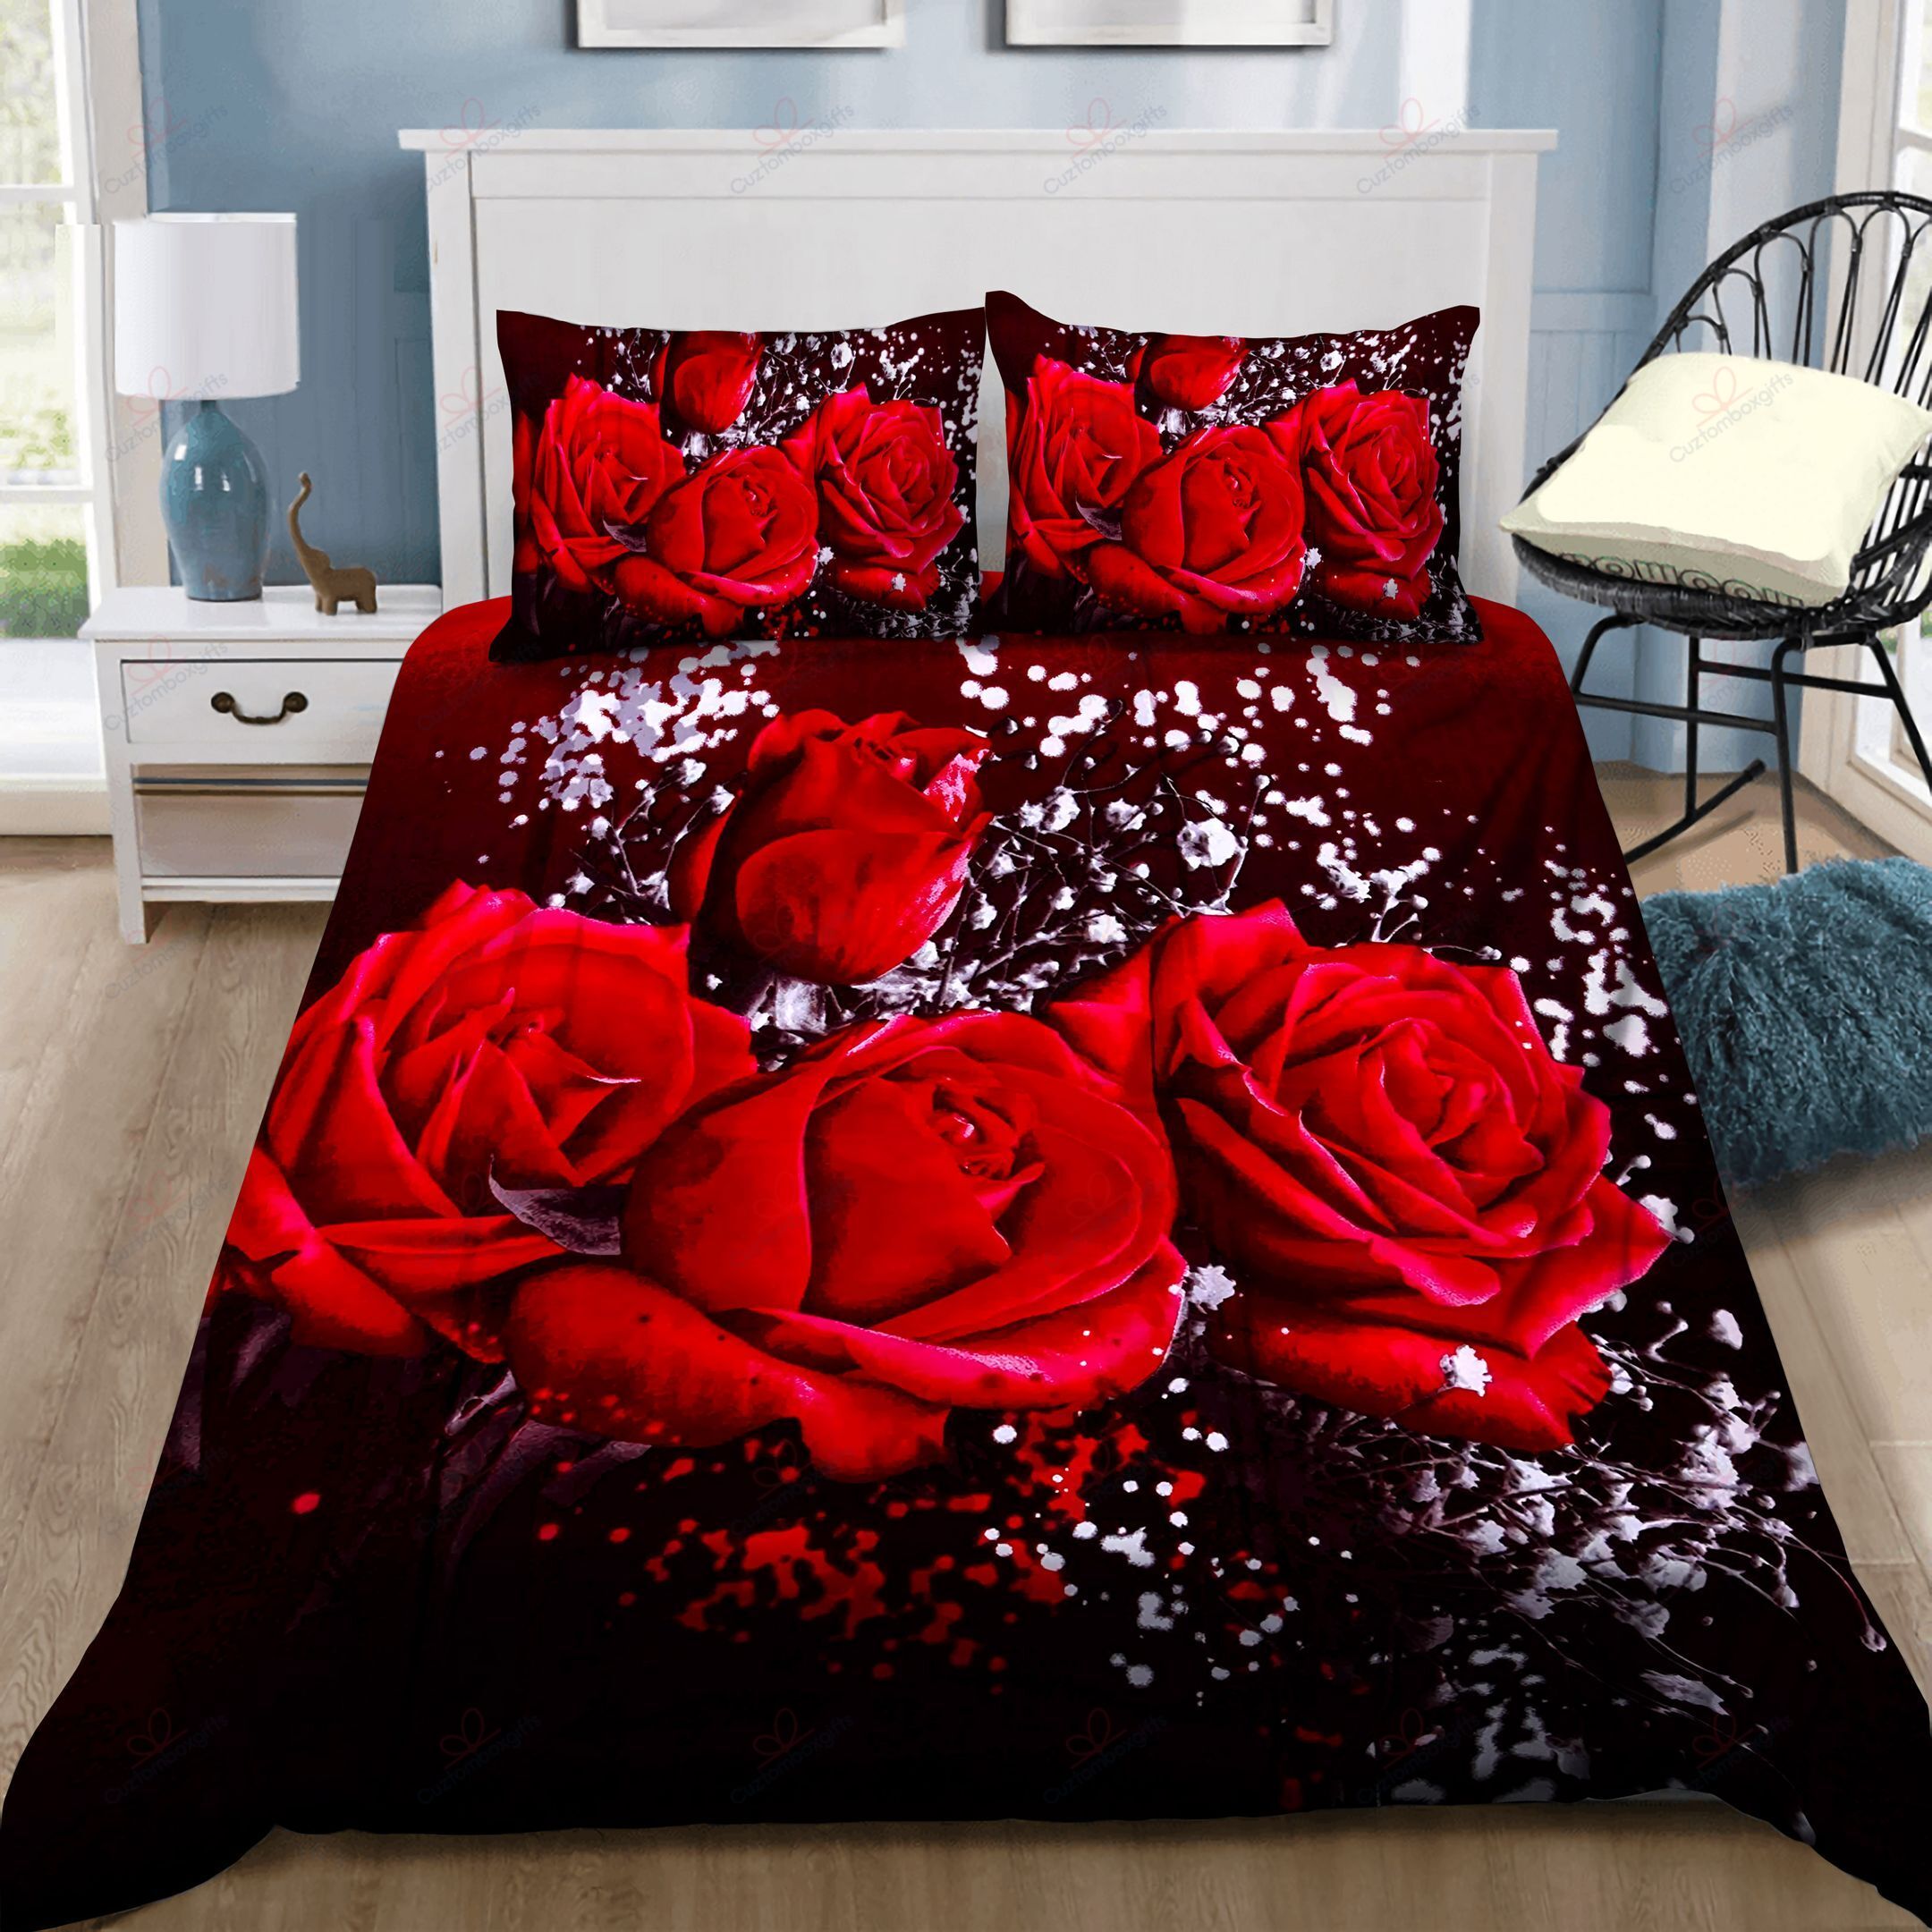 Red Rose Bedding Sets B6XOCCHHOB - Betiti Store